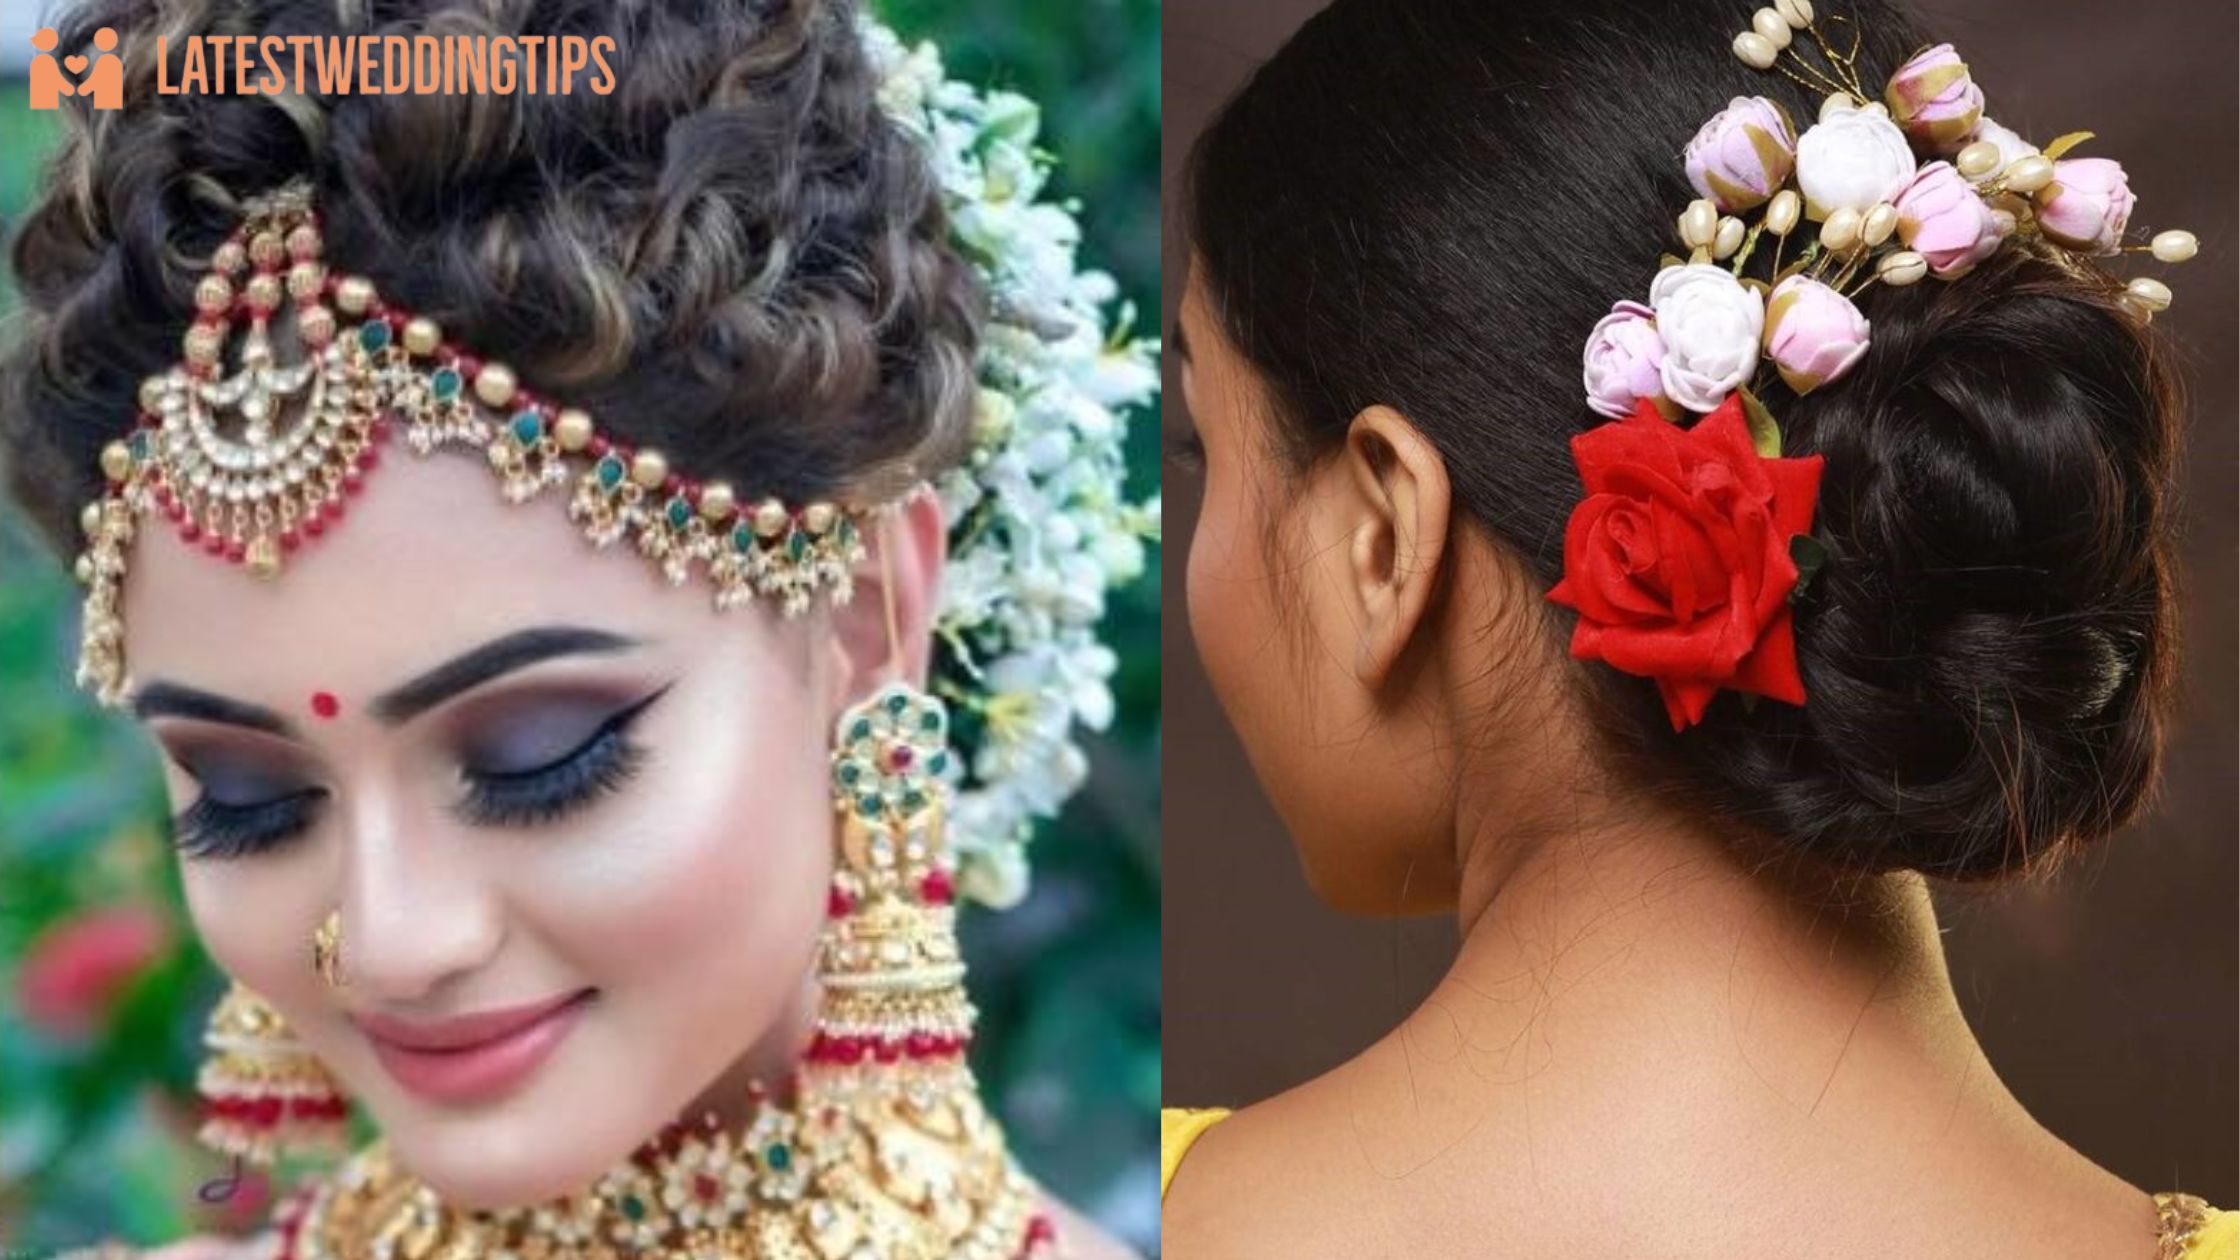 Indian Wedding Bun Hairstyle With Flowers and Gajra!